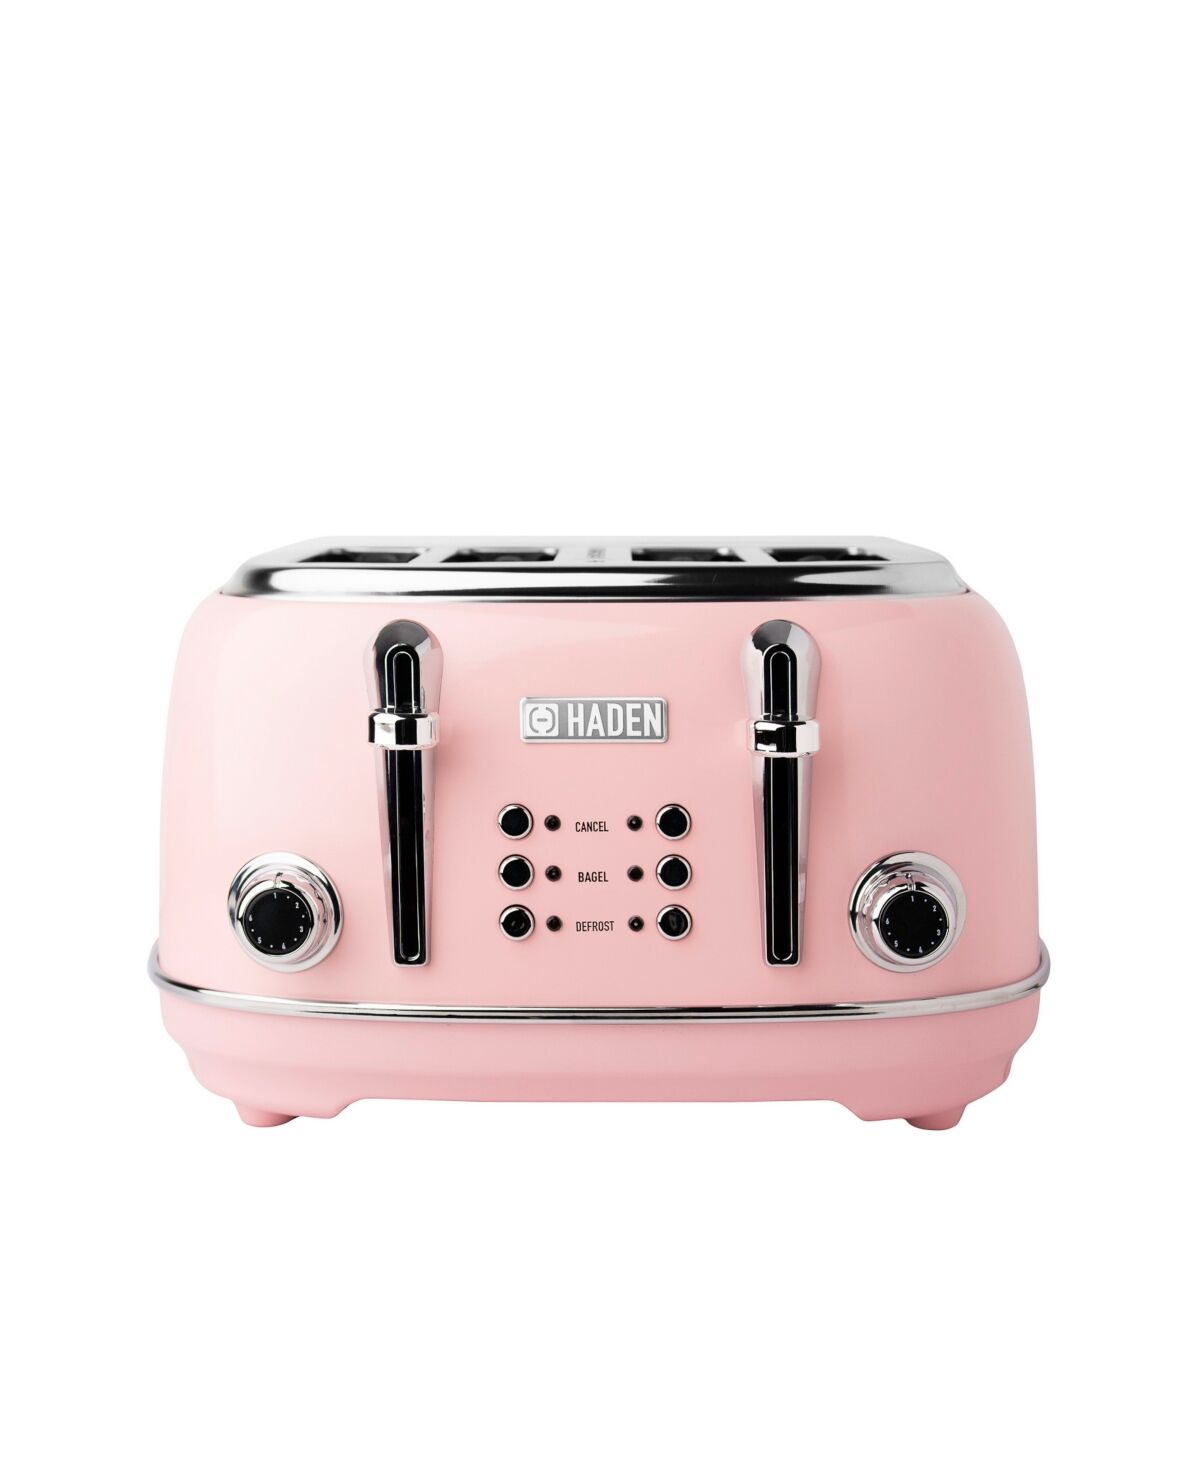 Haden Heritage 4-Slice Toaster with Browning Control, Cancel, Bagel and Defrost Settings - 75044 - English Rose Pink